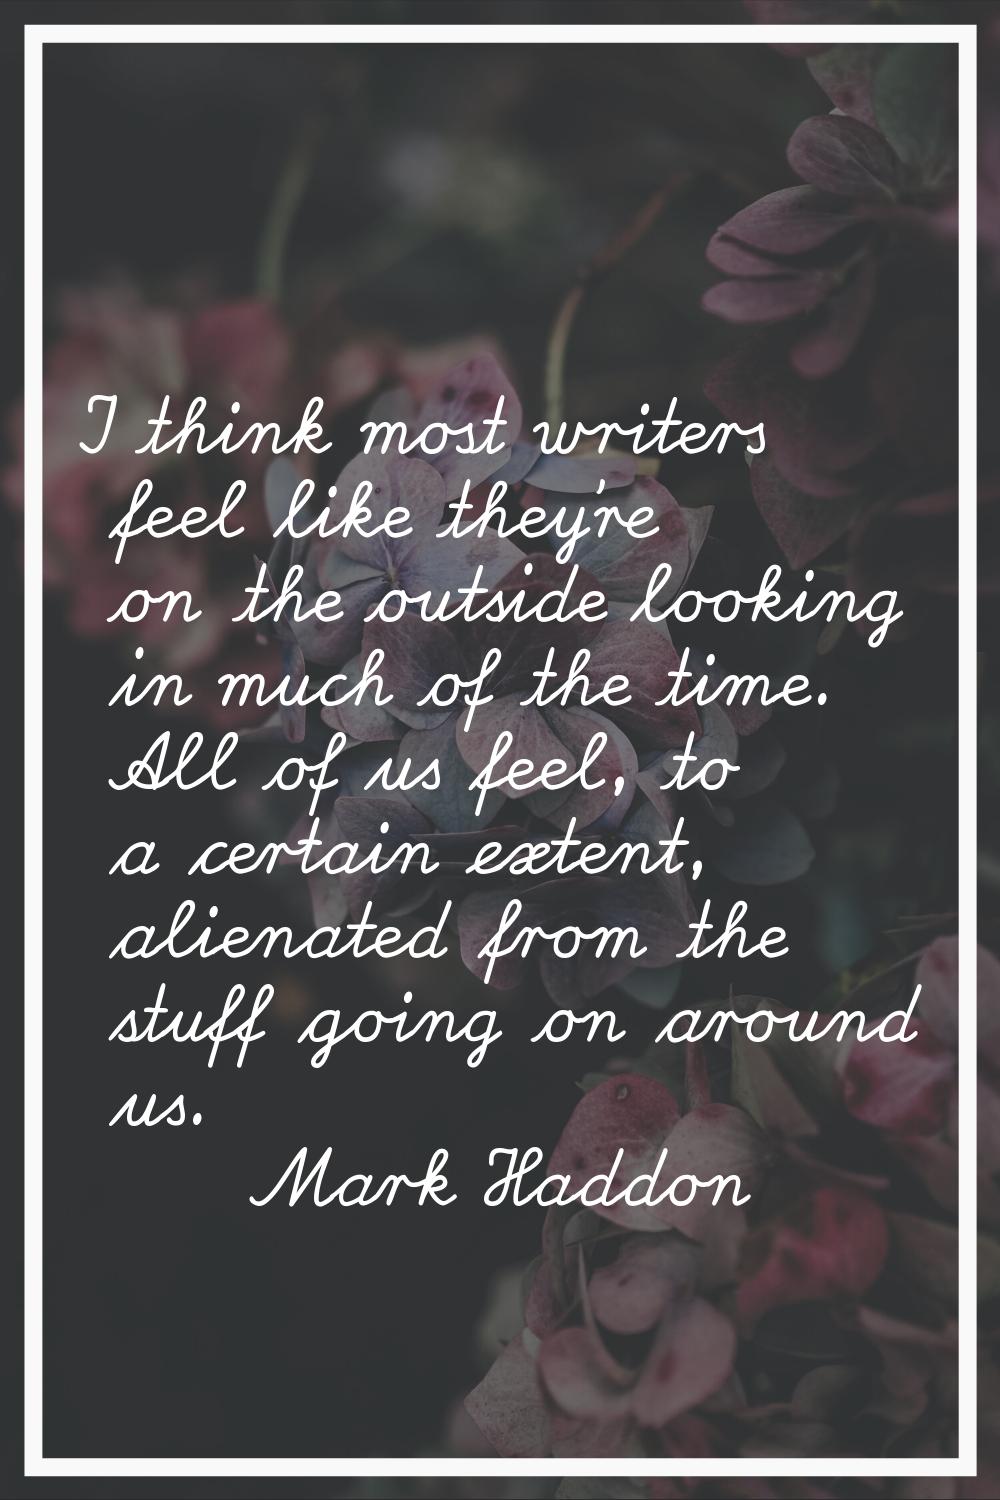 I think most writers feel like they're on the outside looking in much of the time. All of us feel, 